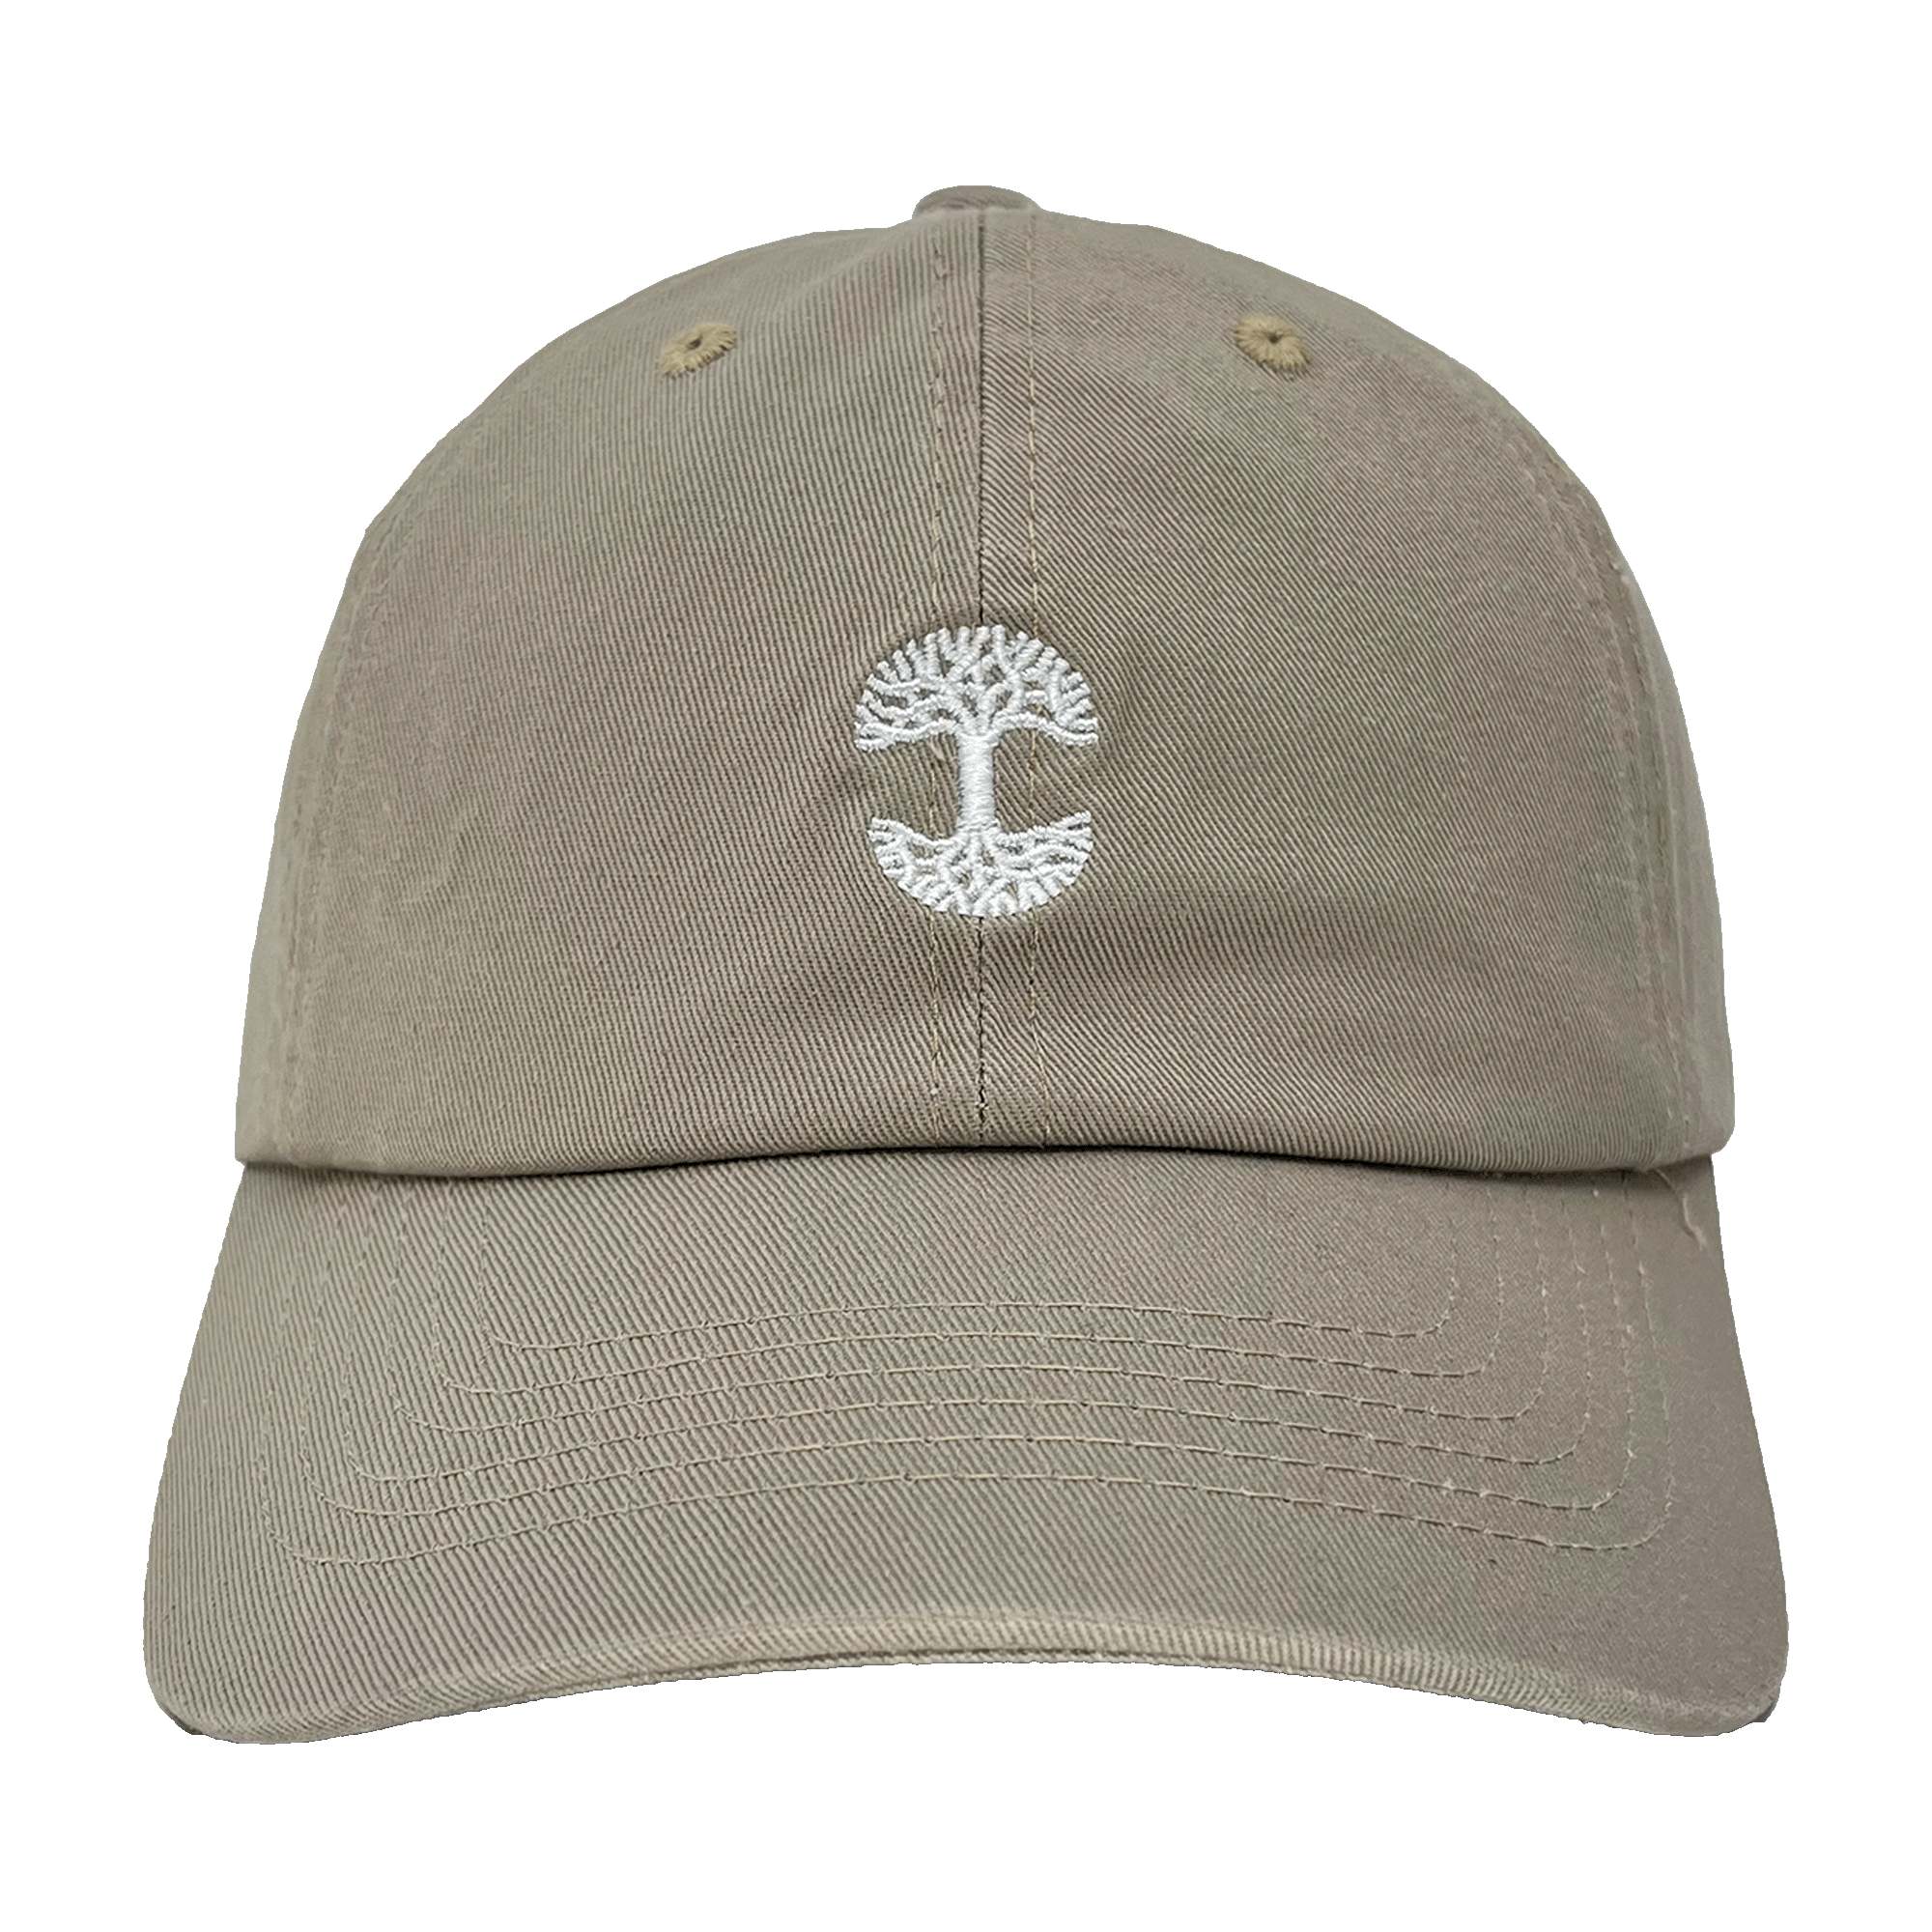 Front view of Khaki brown dad cap with micro-sized white embroidered Oaklandish tree logo on the crown.